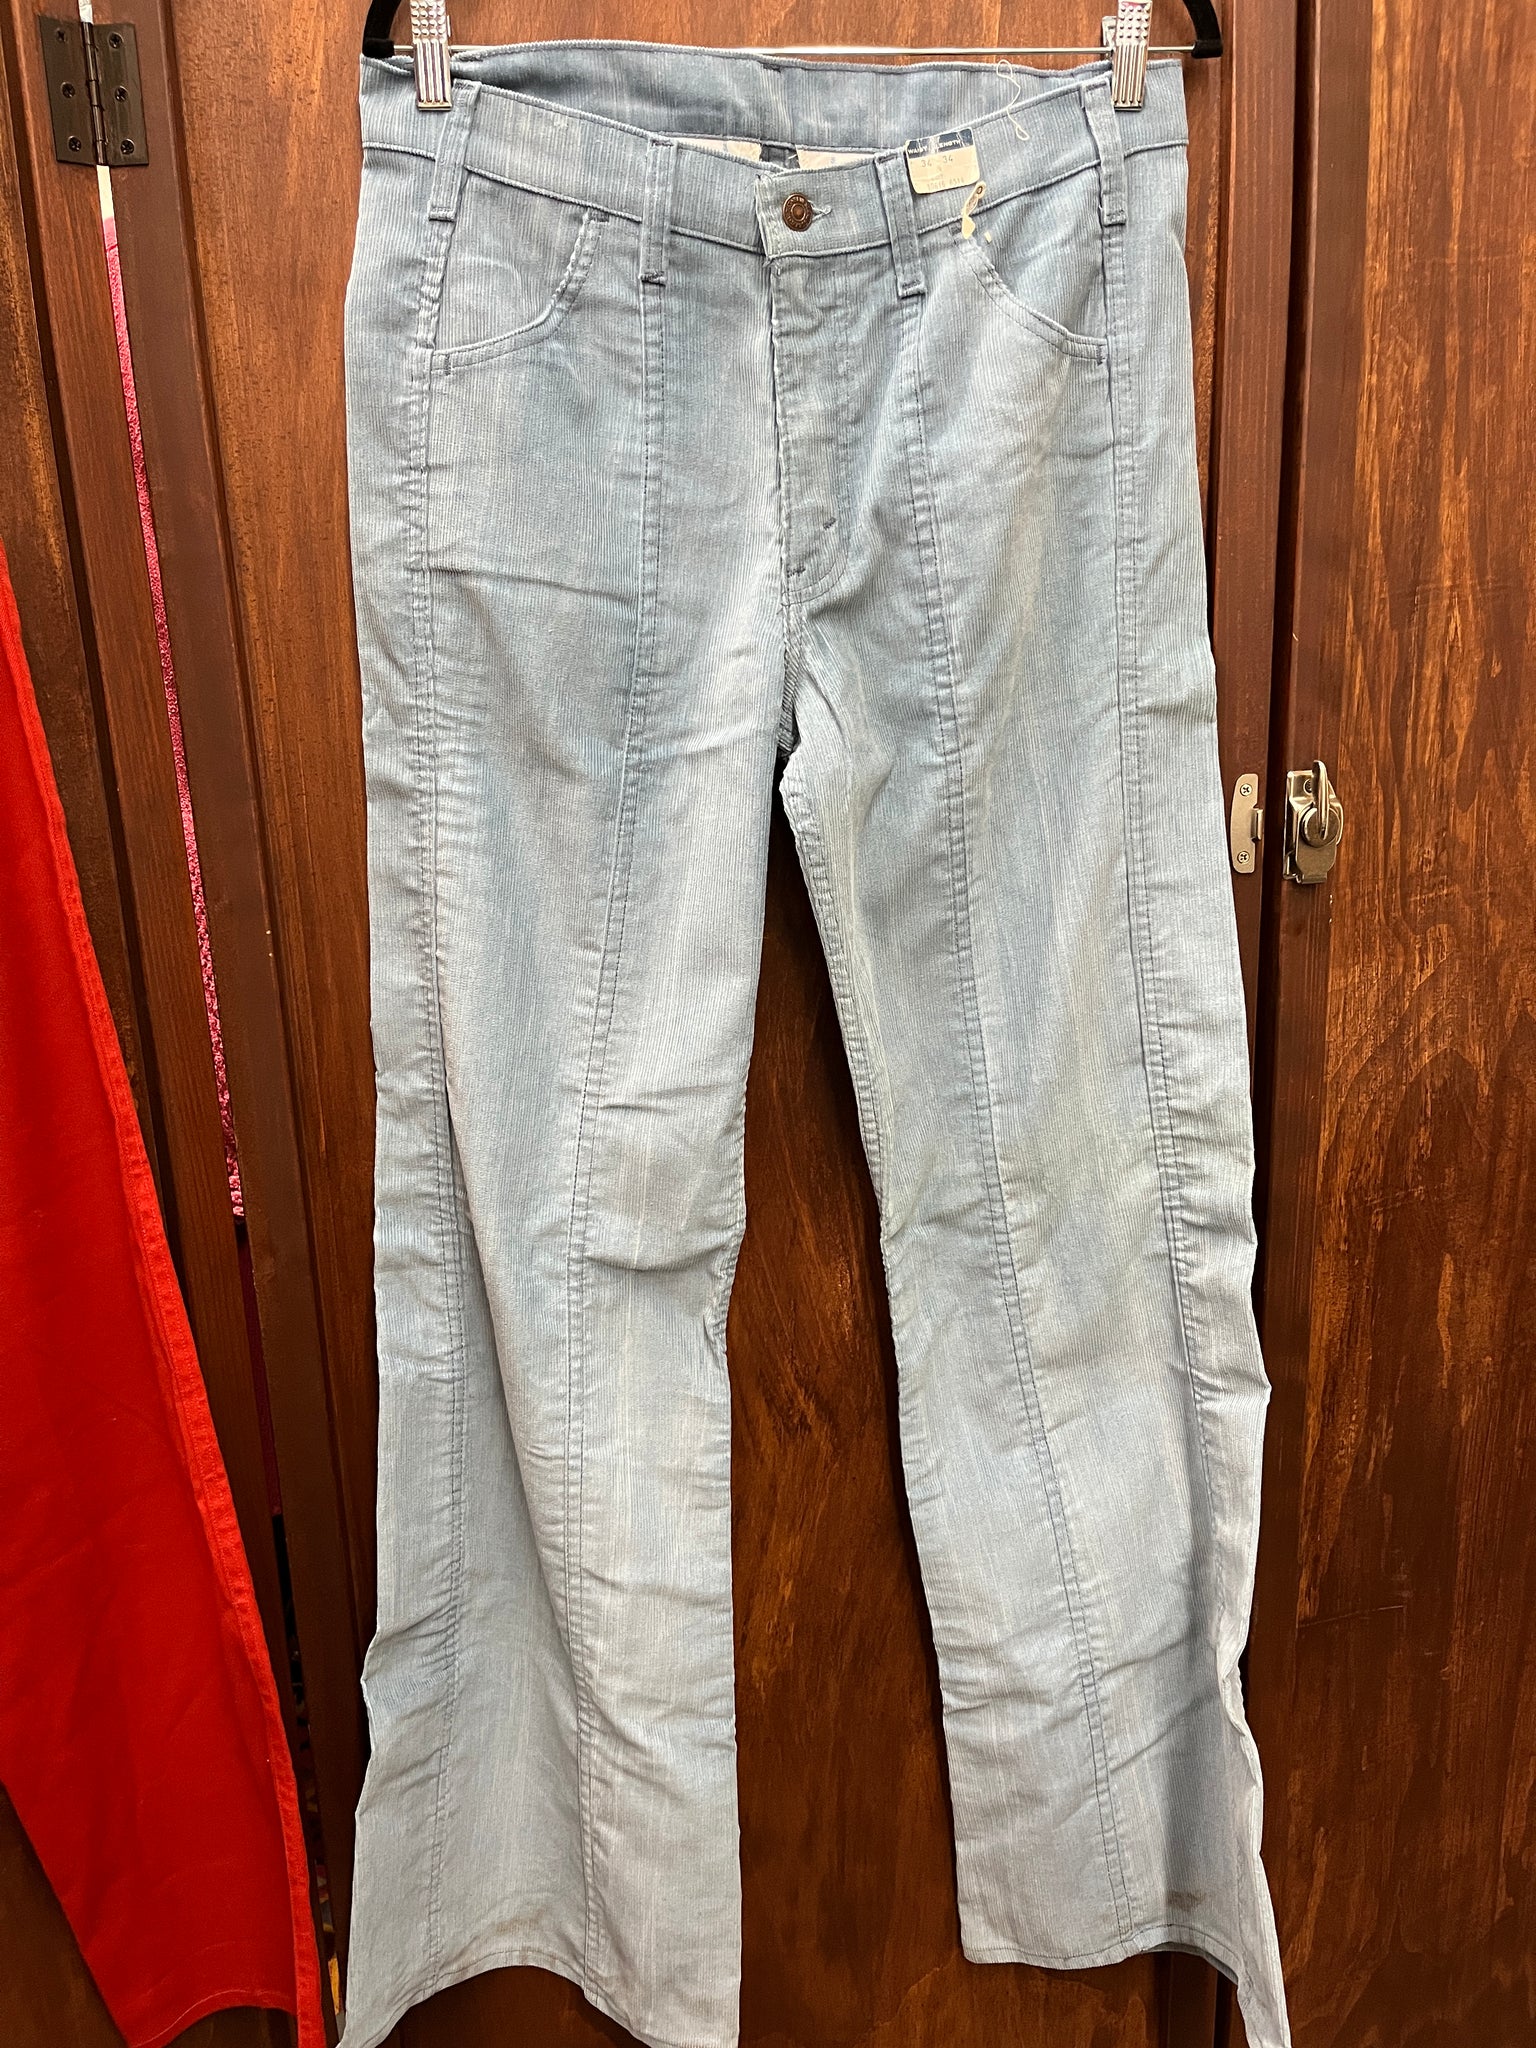 1970s MENS PANTS- Levis gray blue cord bell bottoms